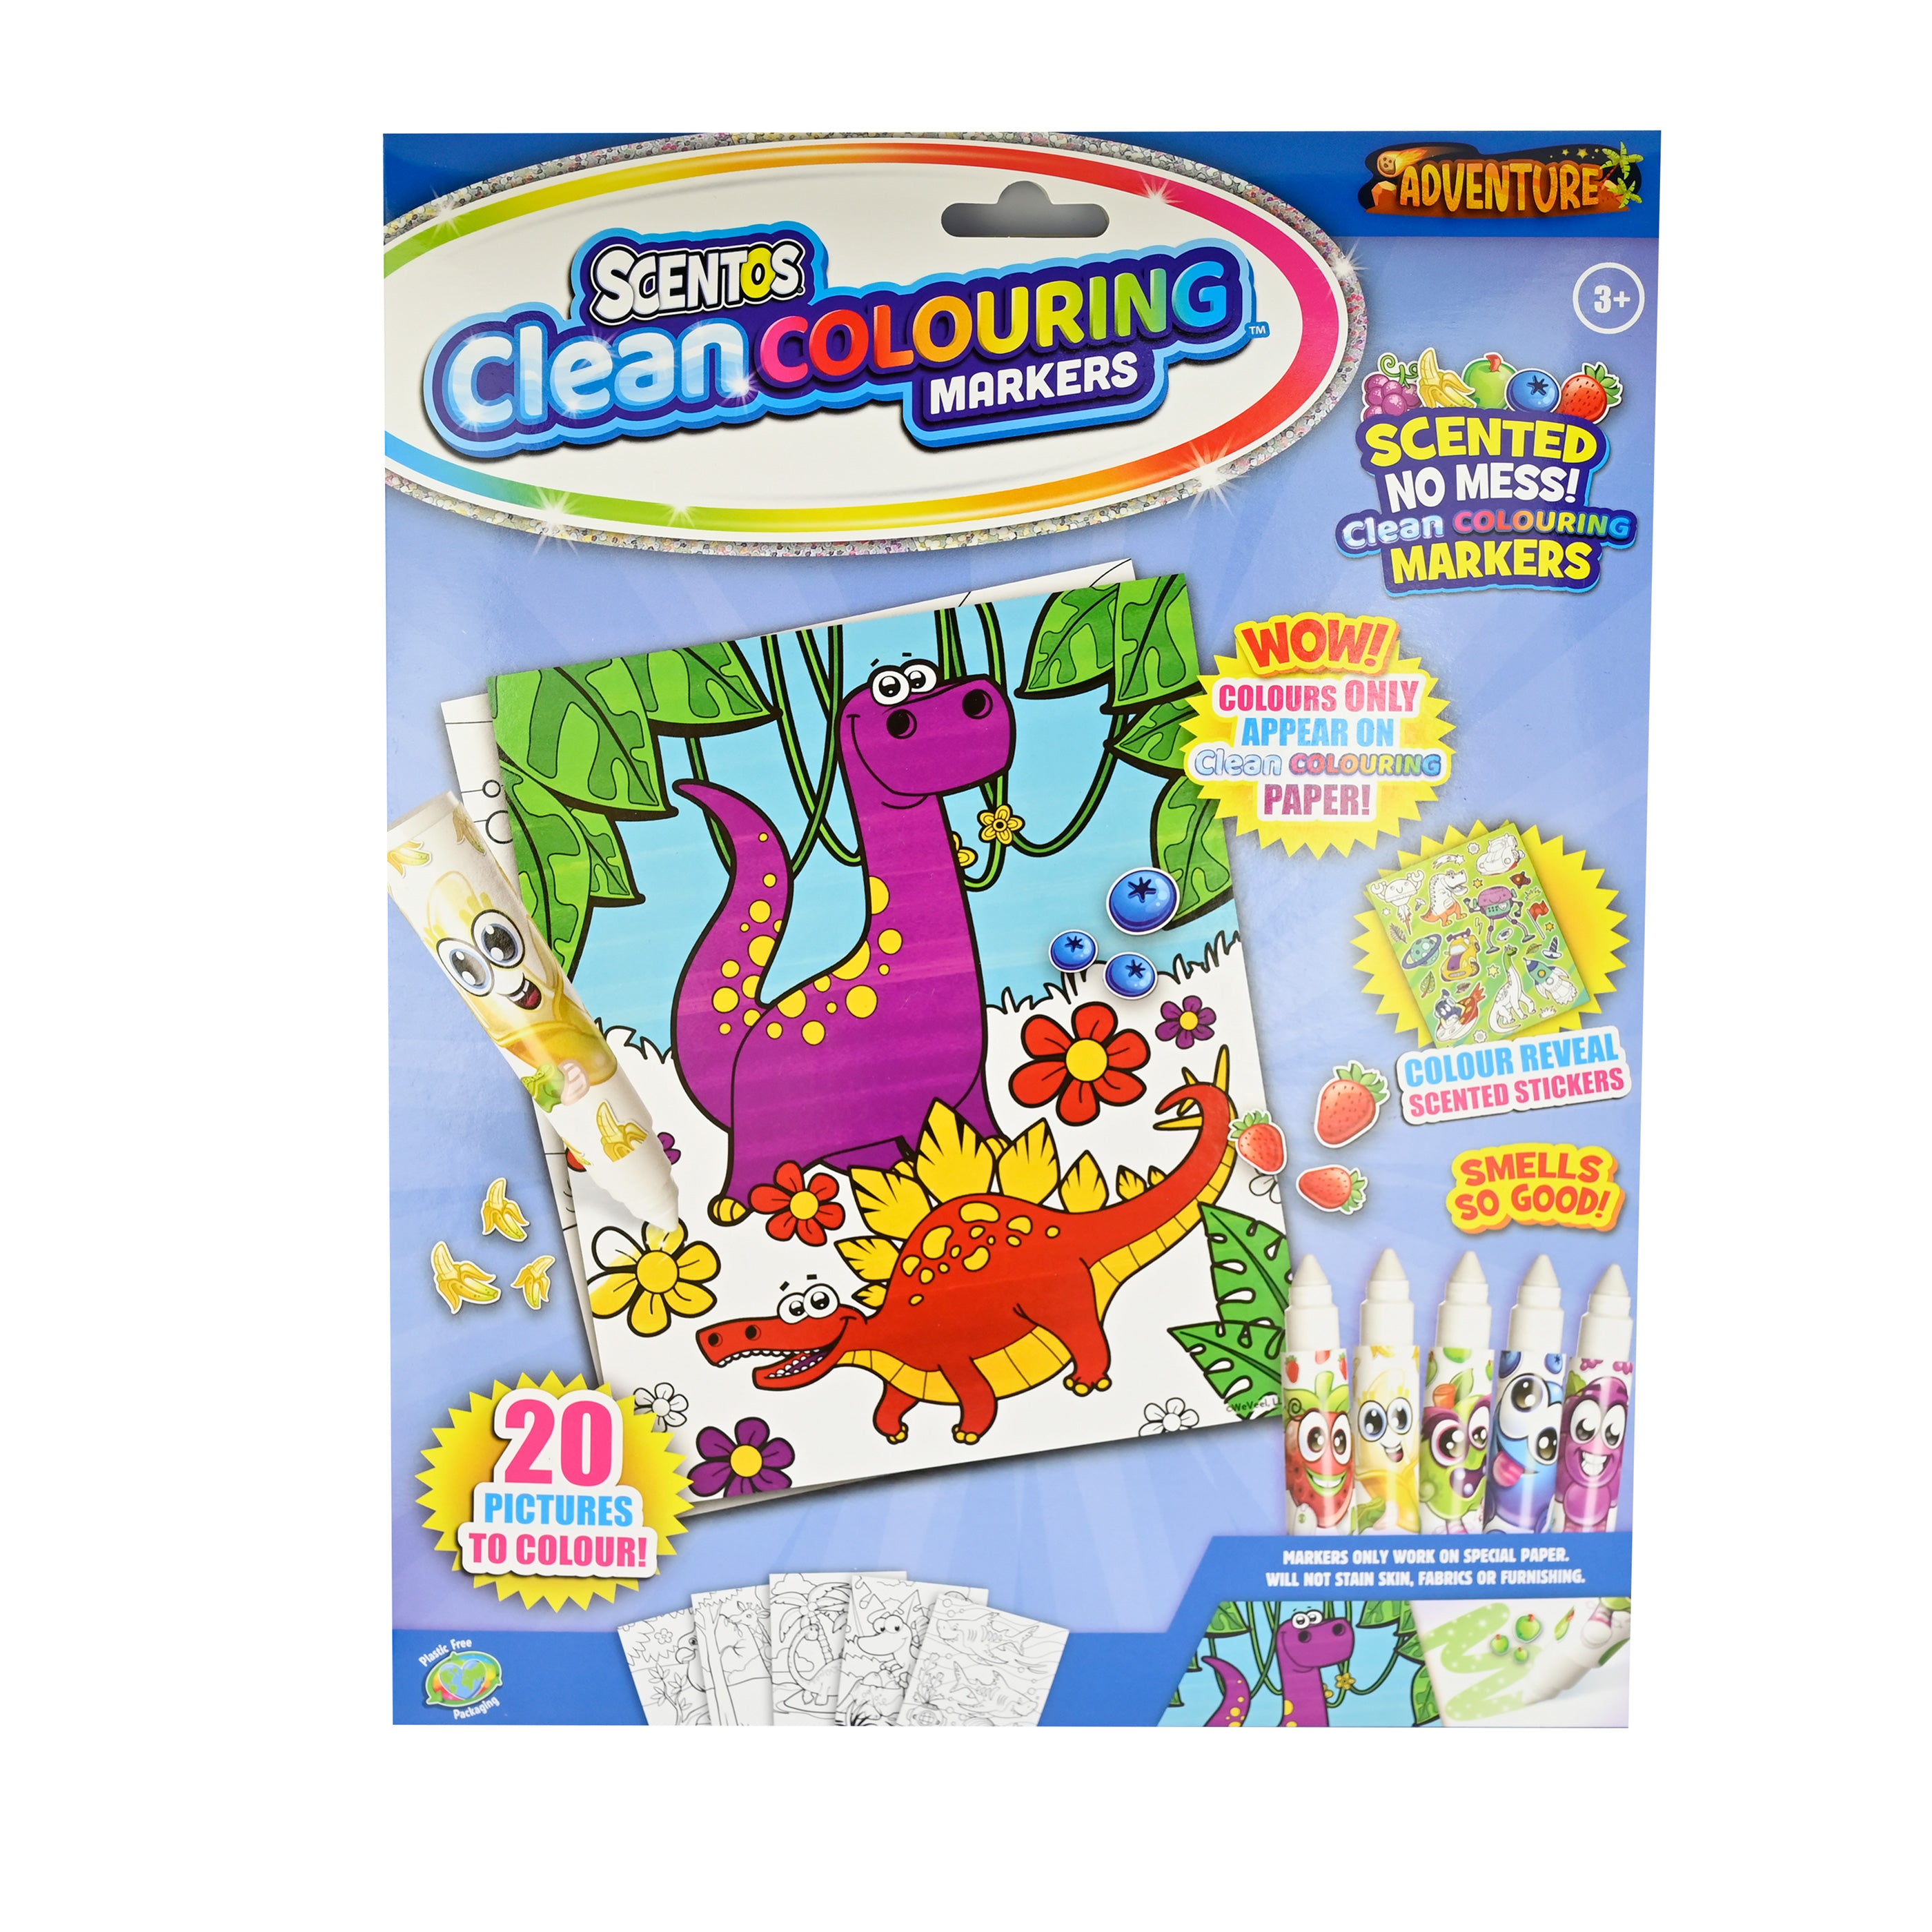 Scentos Clean Colouring Markers - Adventure